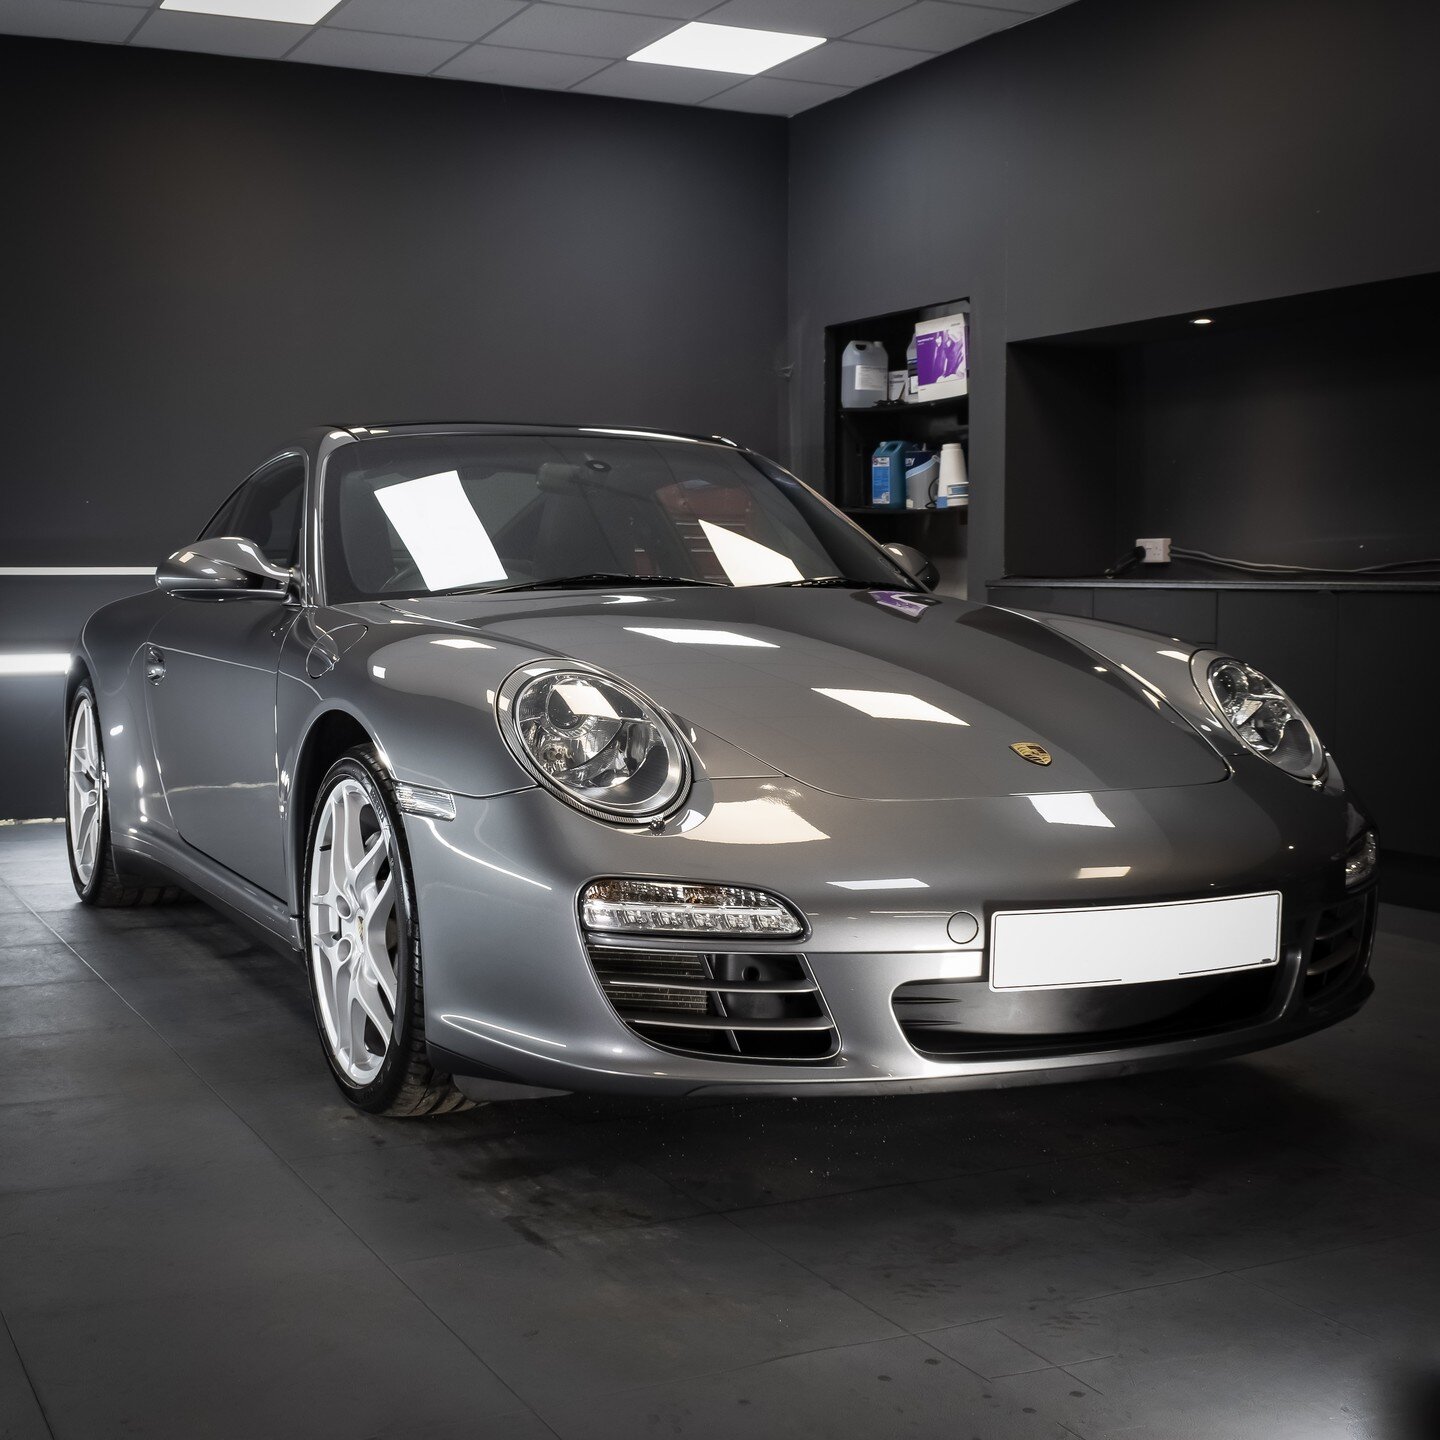 Protect your car this Autumn &amp; Winter with our Ceramic Coating applications. This Porsche 997 required a single stage enhancement polish before applying Gtechniq EXO v4 Ceramic

#porsche #ceramiccoating #gtechniq